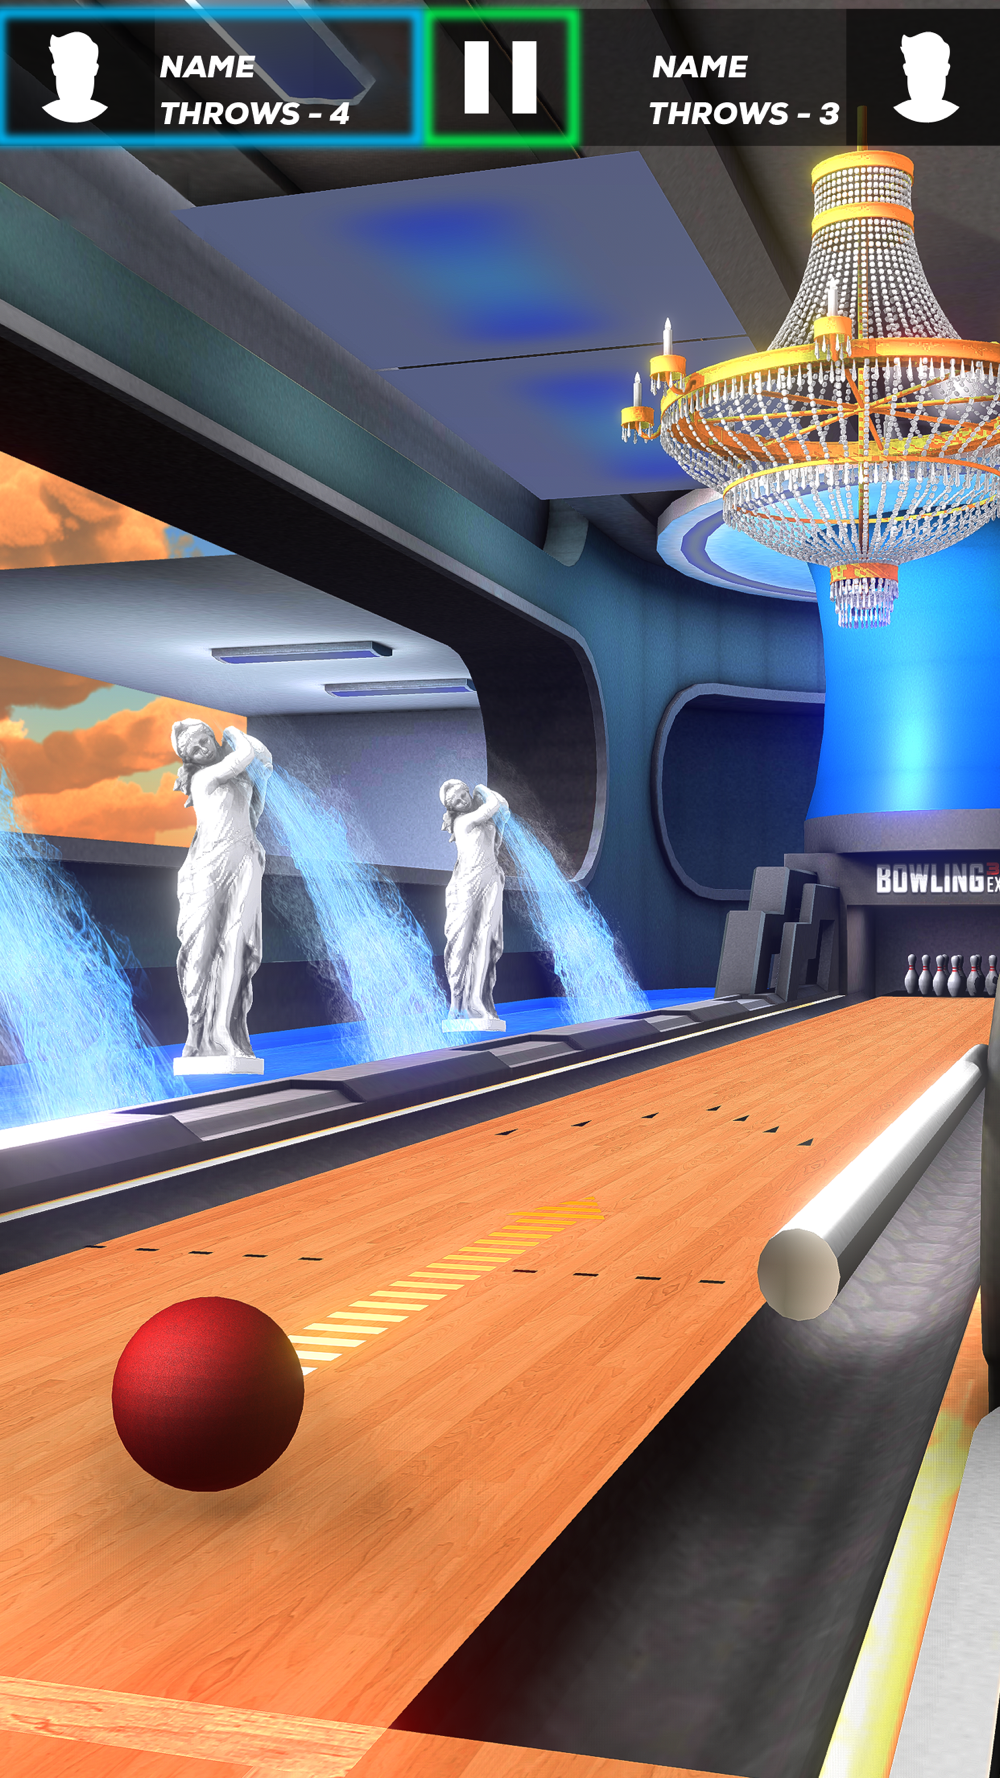 Bowling Strike 3D Bowling Game Free Download App for iPhone